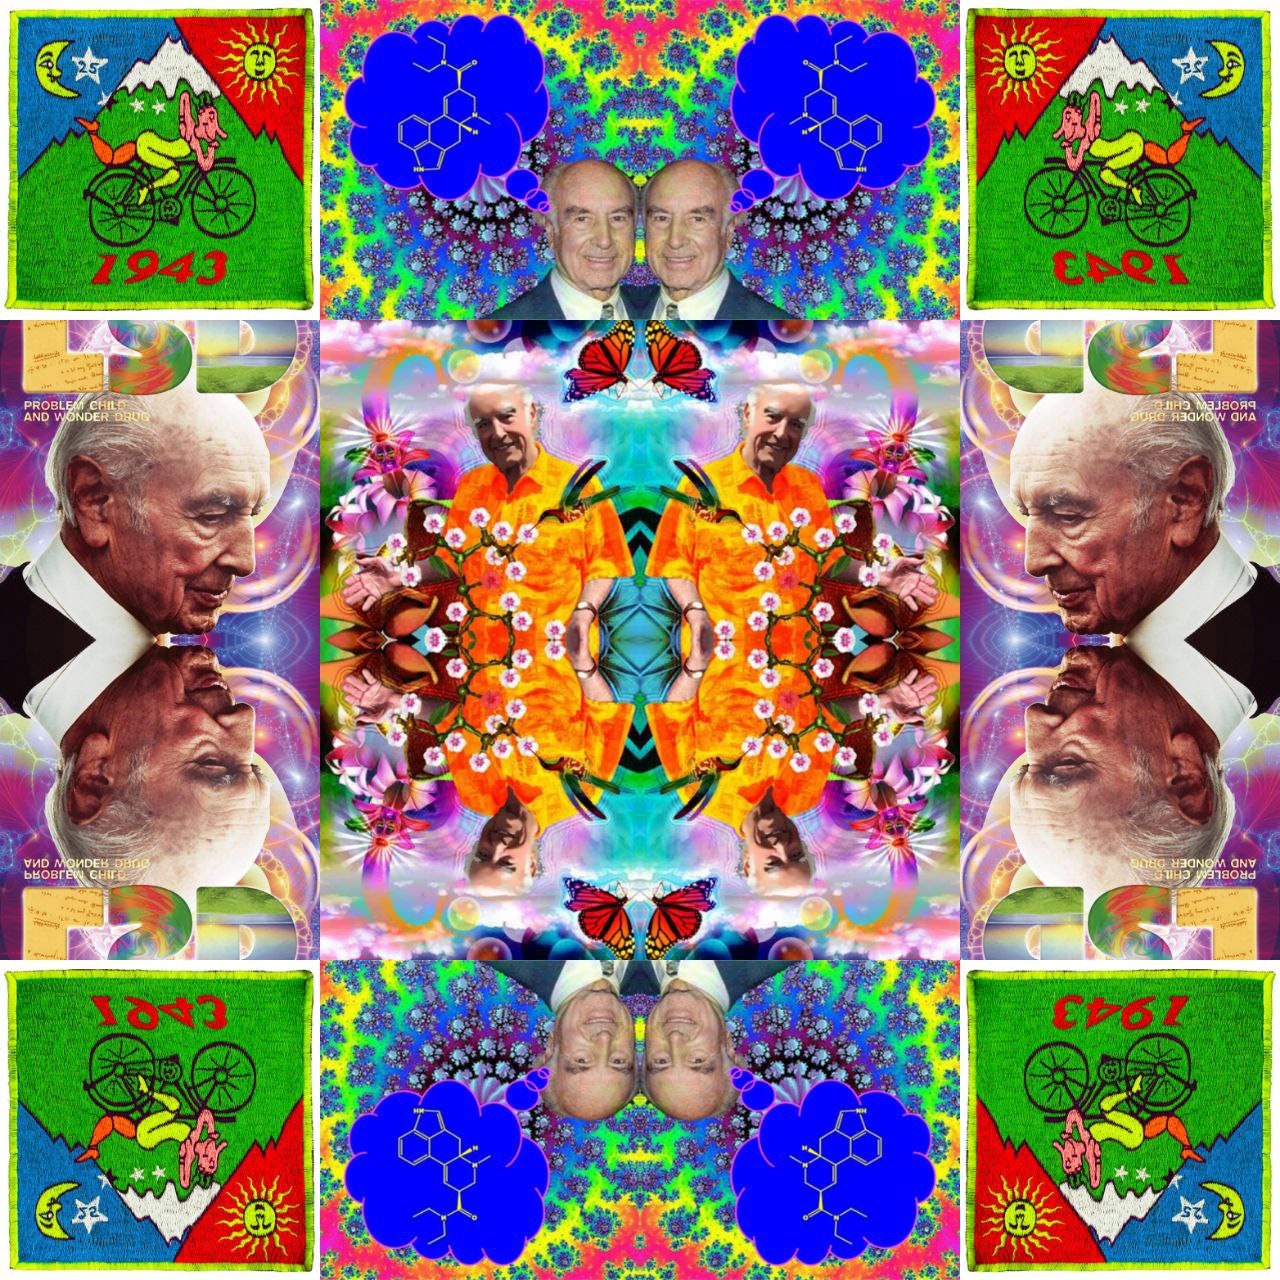 Psychedelic Bicycle Day Albert Hofmann LSD embroidery Patch Hippie Timothy Leary Consciousness expansion Psytrance Goatrance Therapy Healing